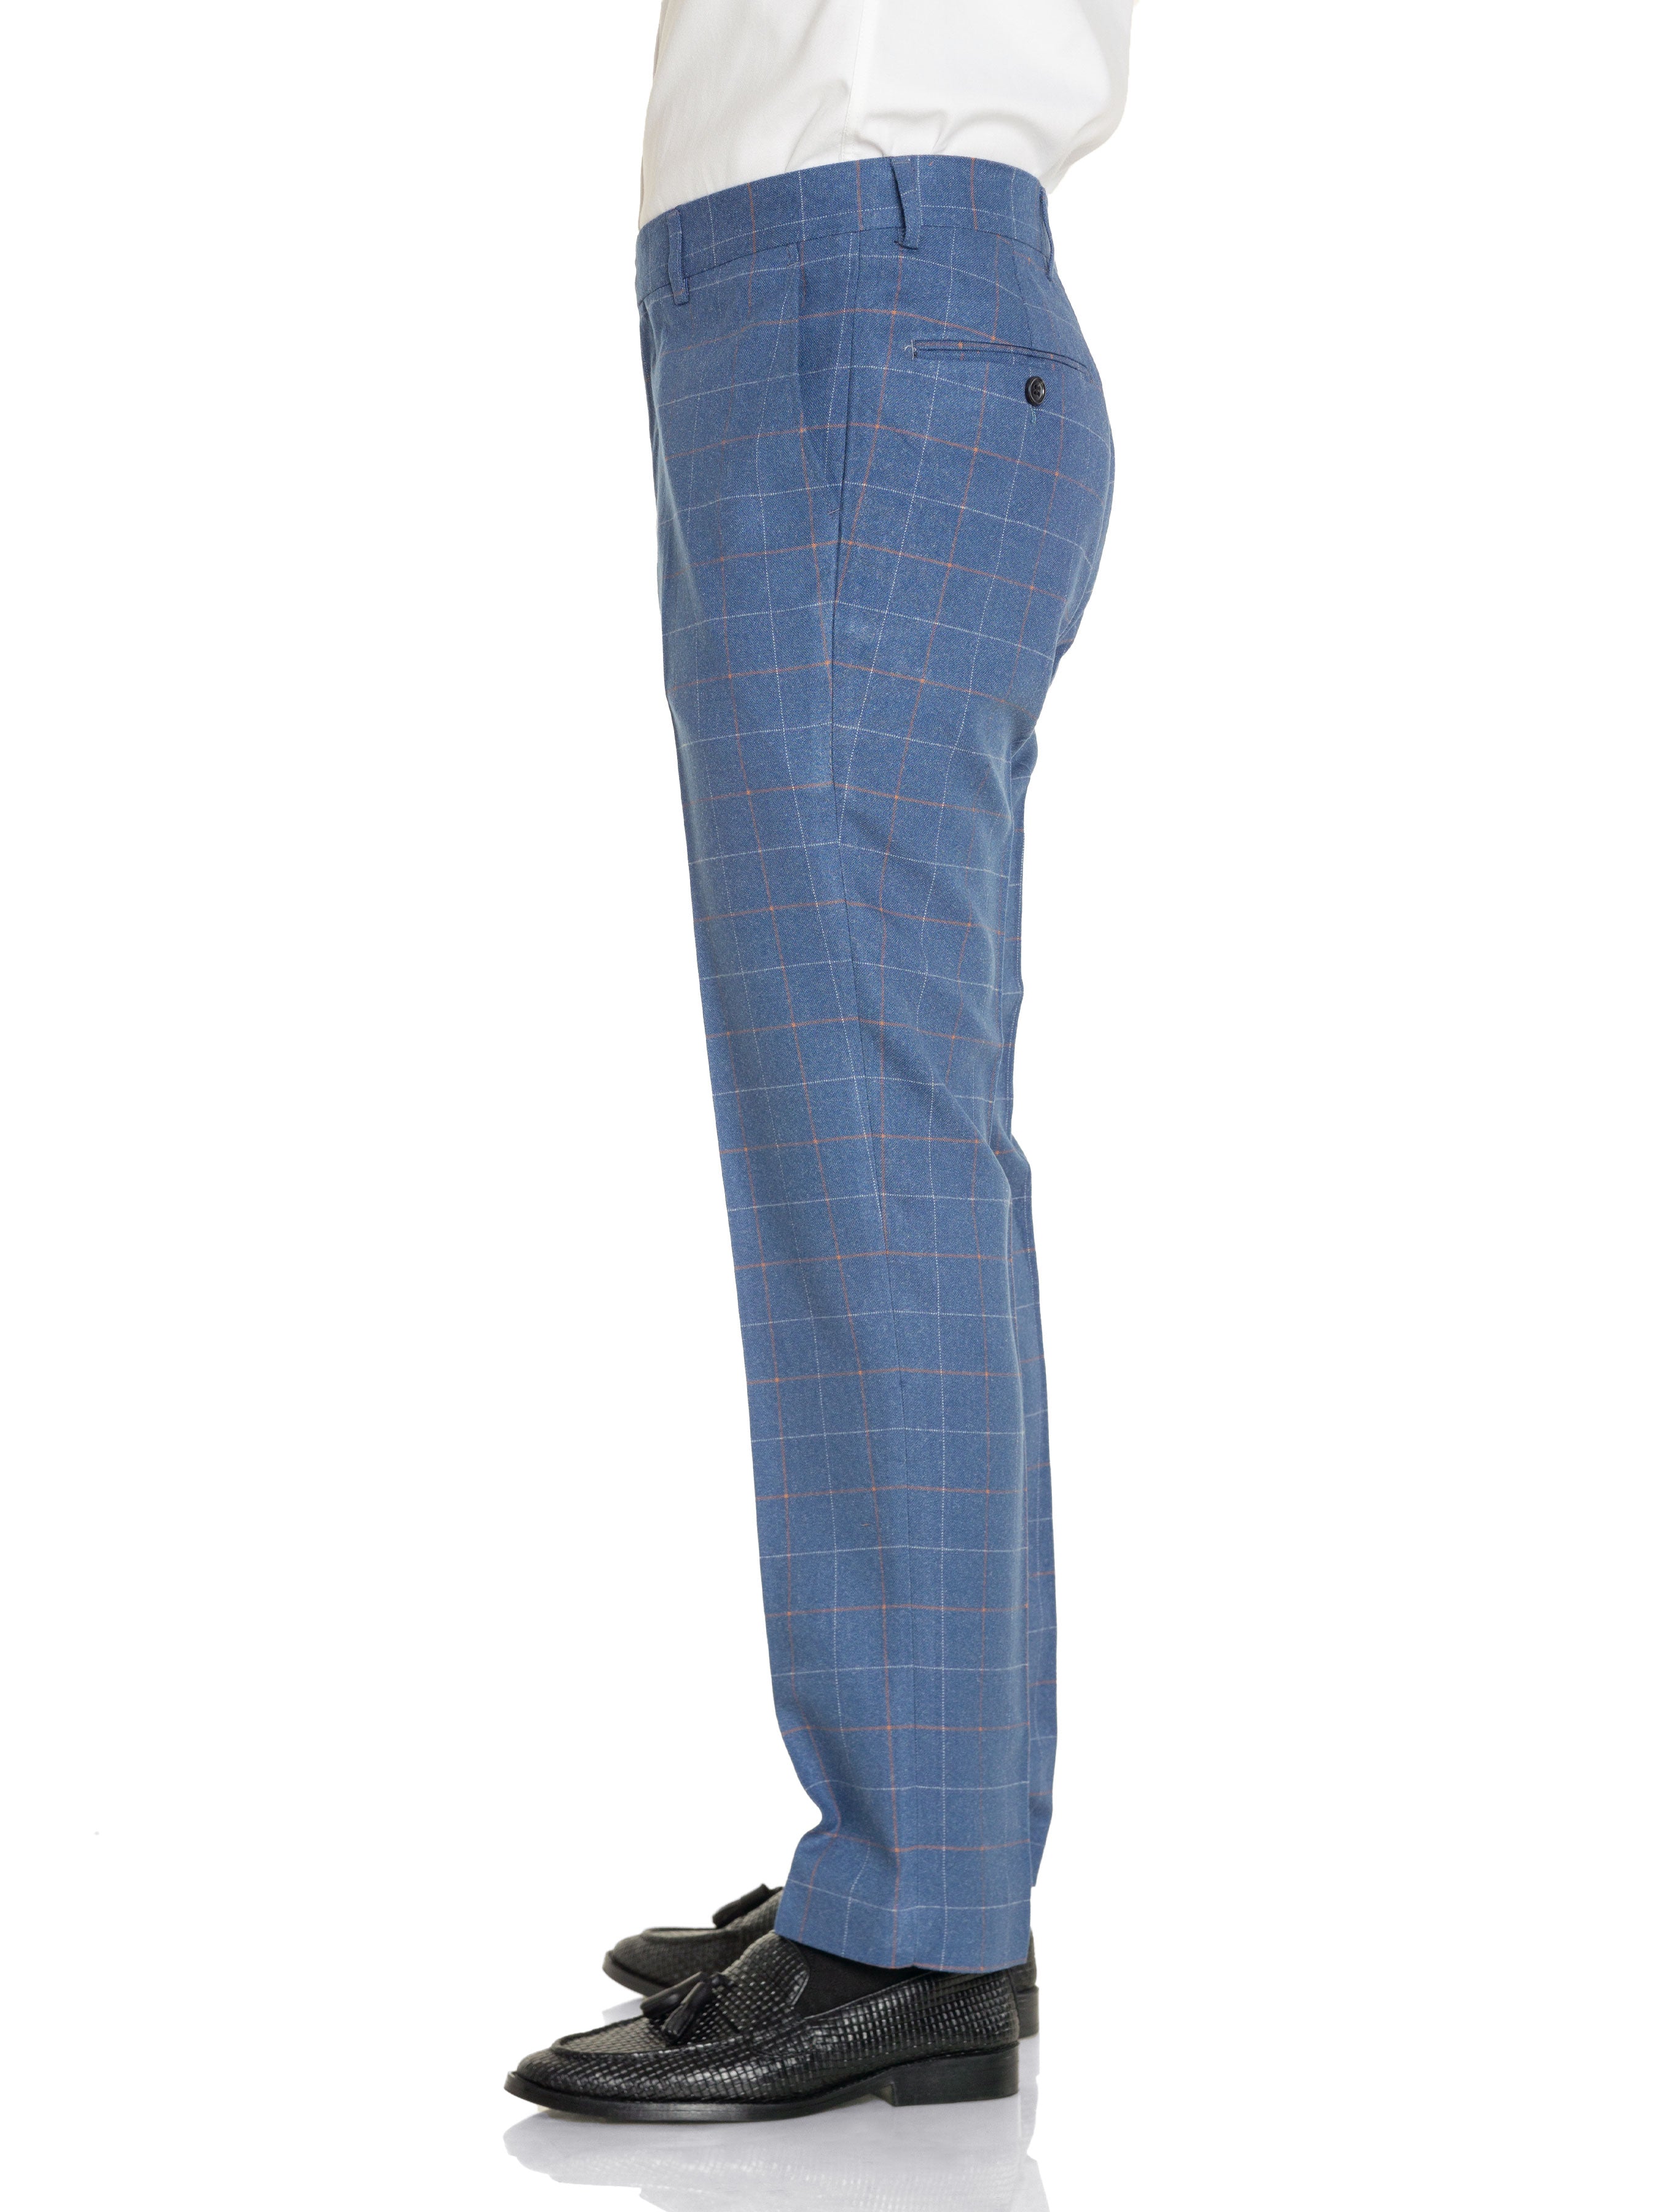 Trousers With Belt Loop -  Light Blue Windowpane Checkered (Stretchable) - Zeve Shoes